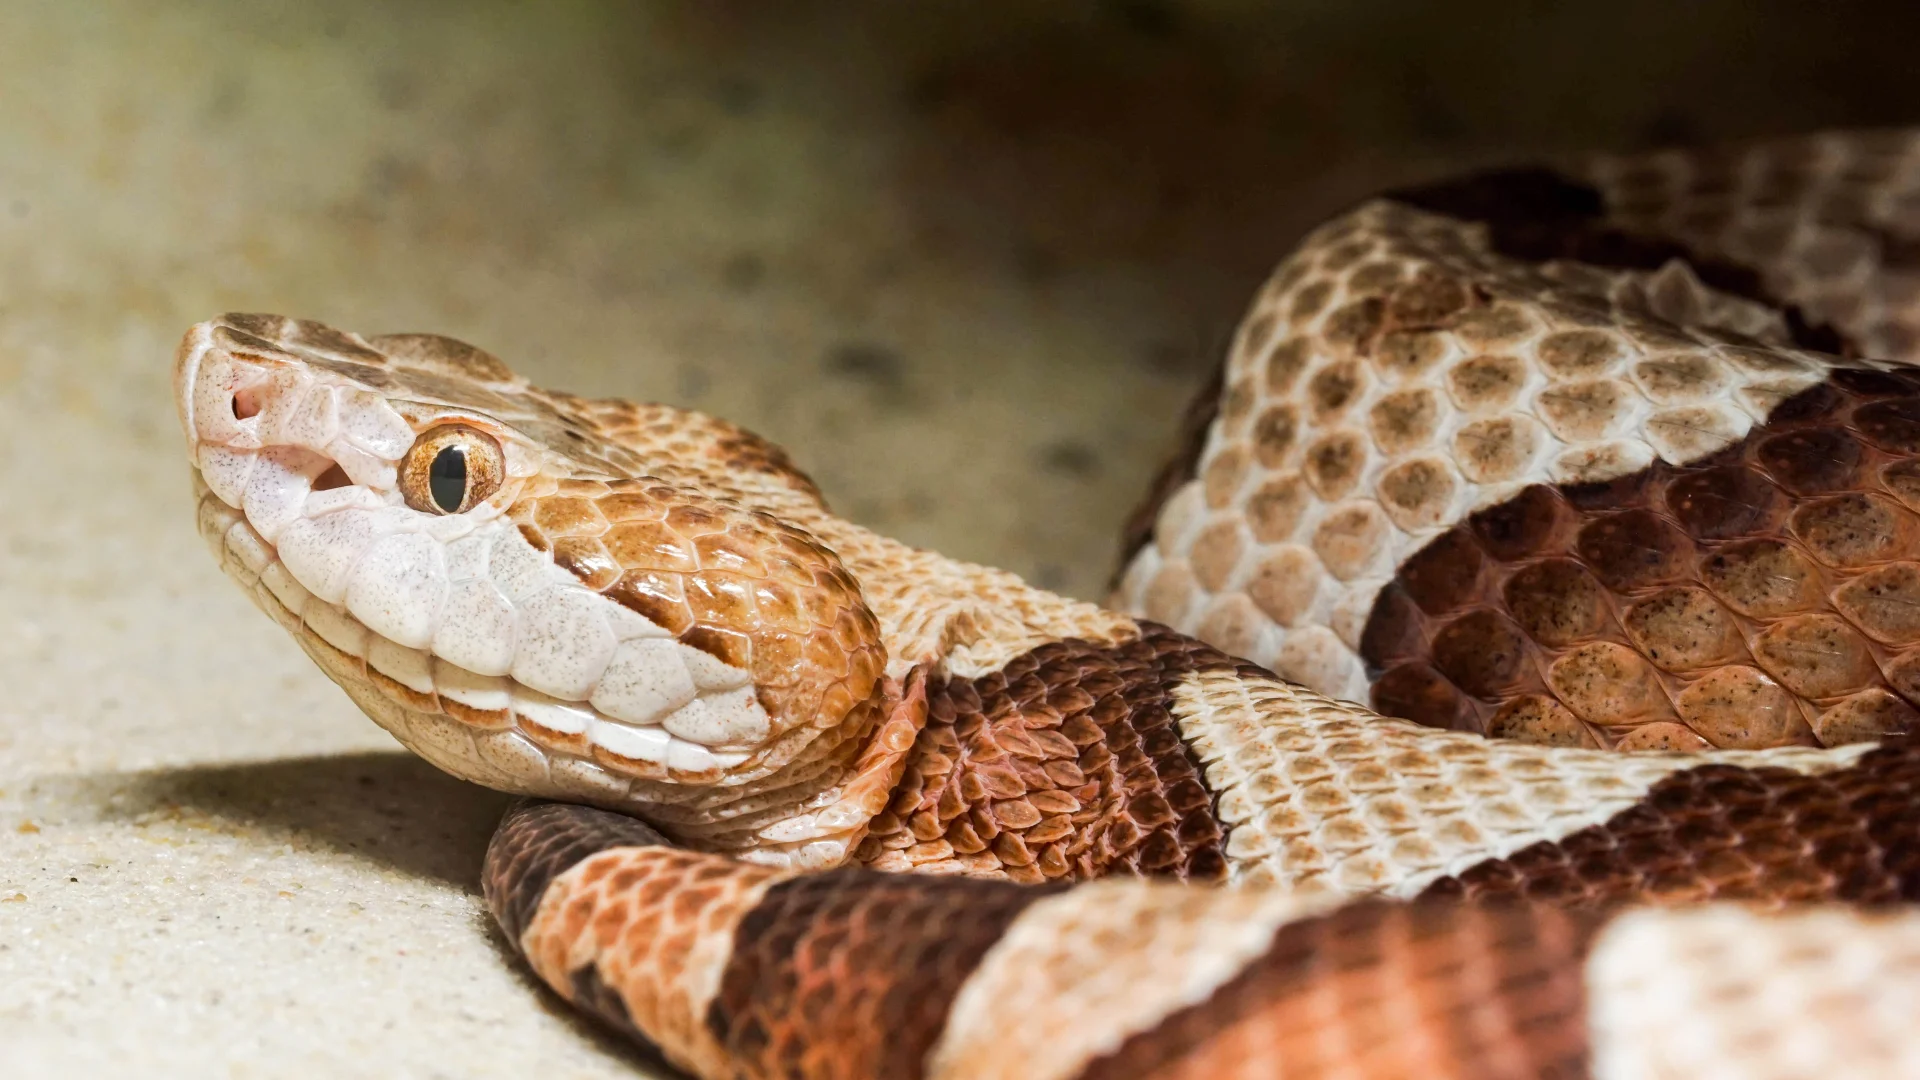 Study finds connection between warmer weather, increase in venomous snake bites